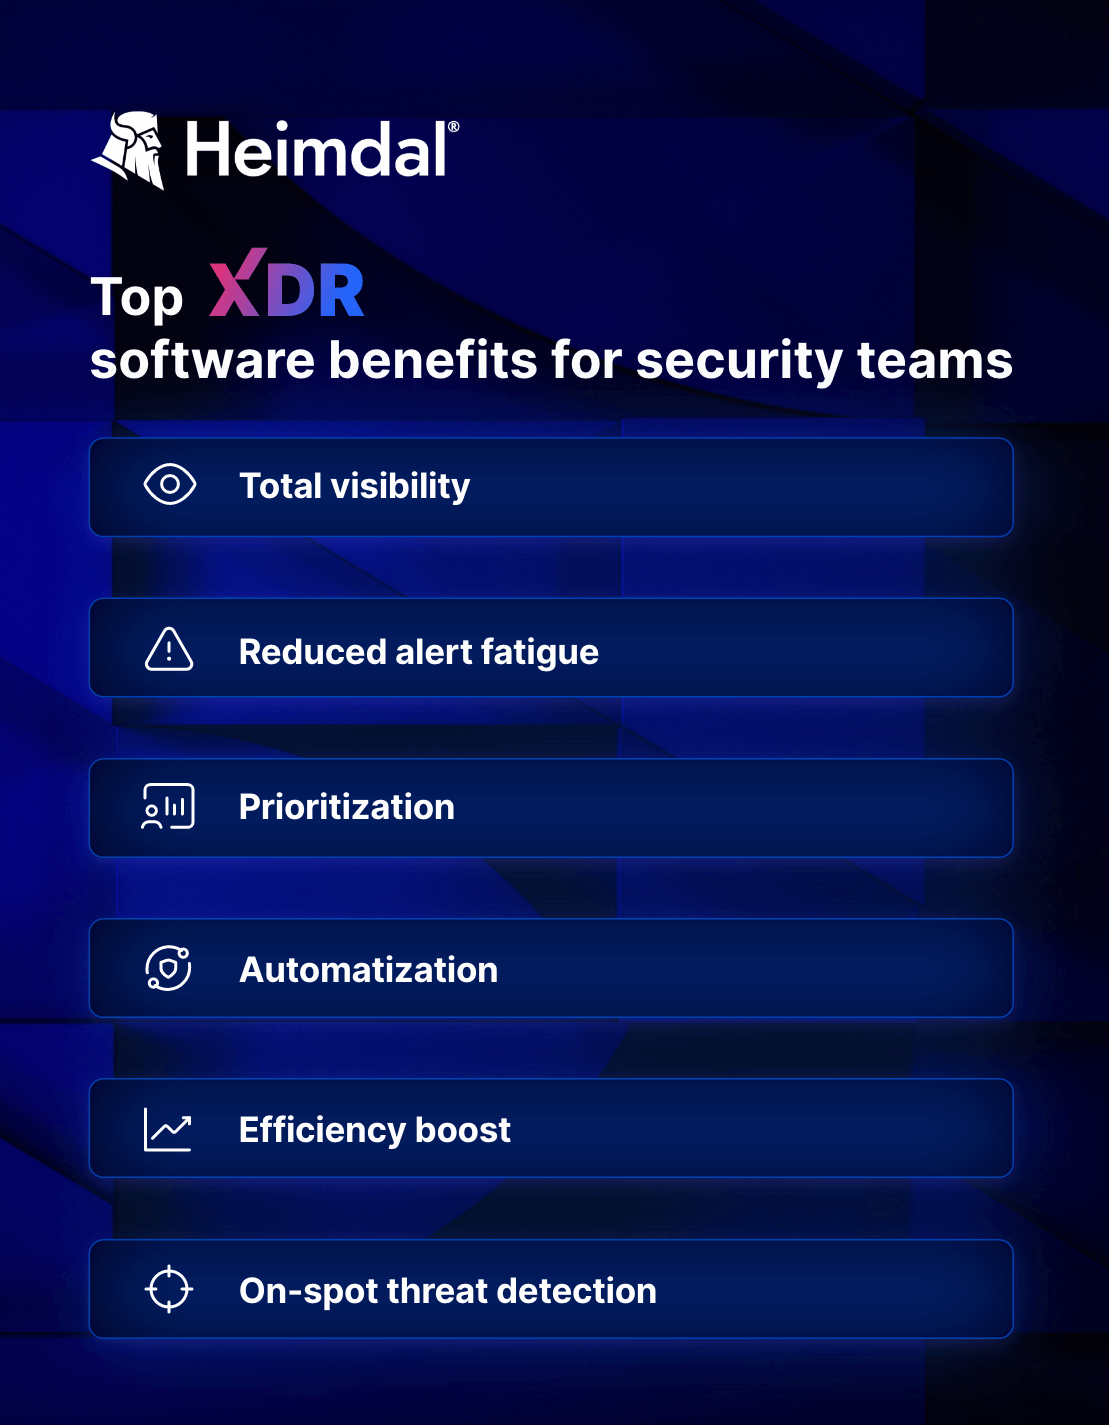 xdr software benefits for security teams